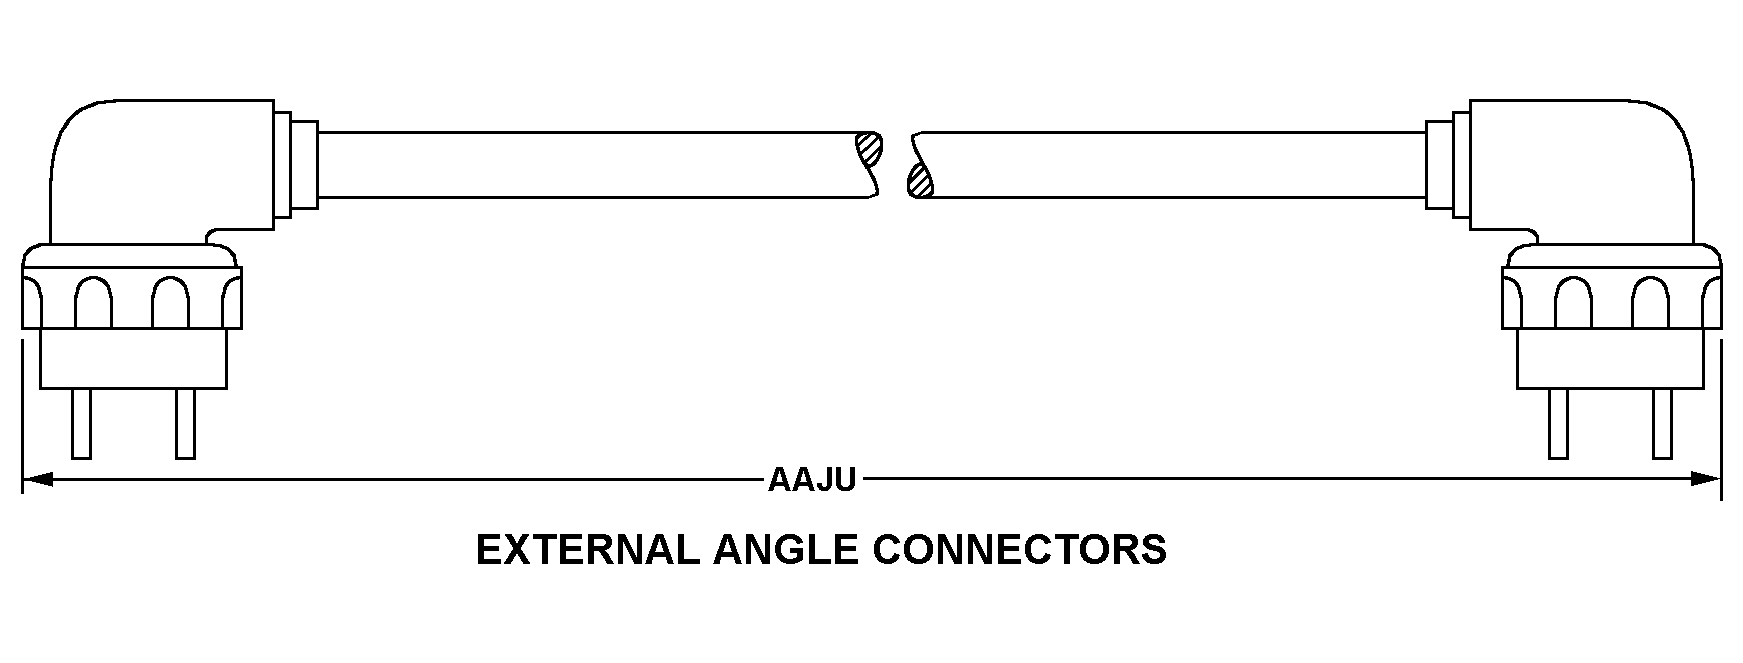 EXTERNAL ANGLE CONNECTORS style nsn 6150-01-198-7222